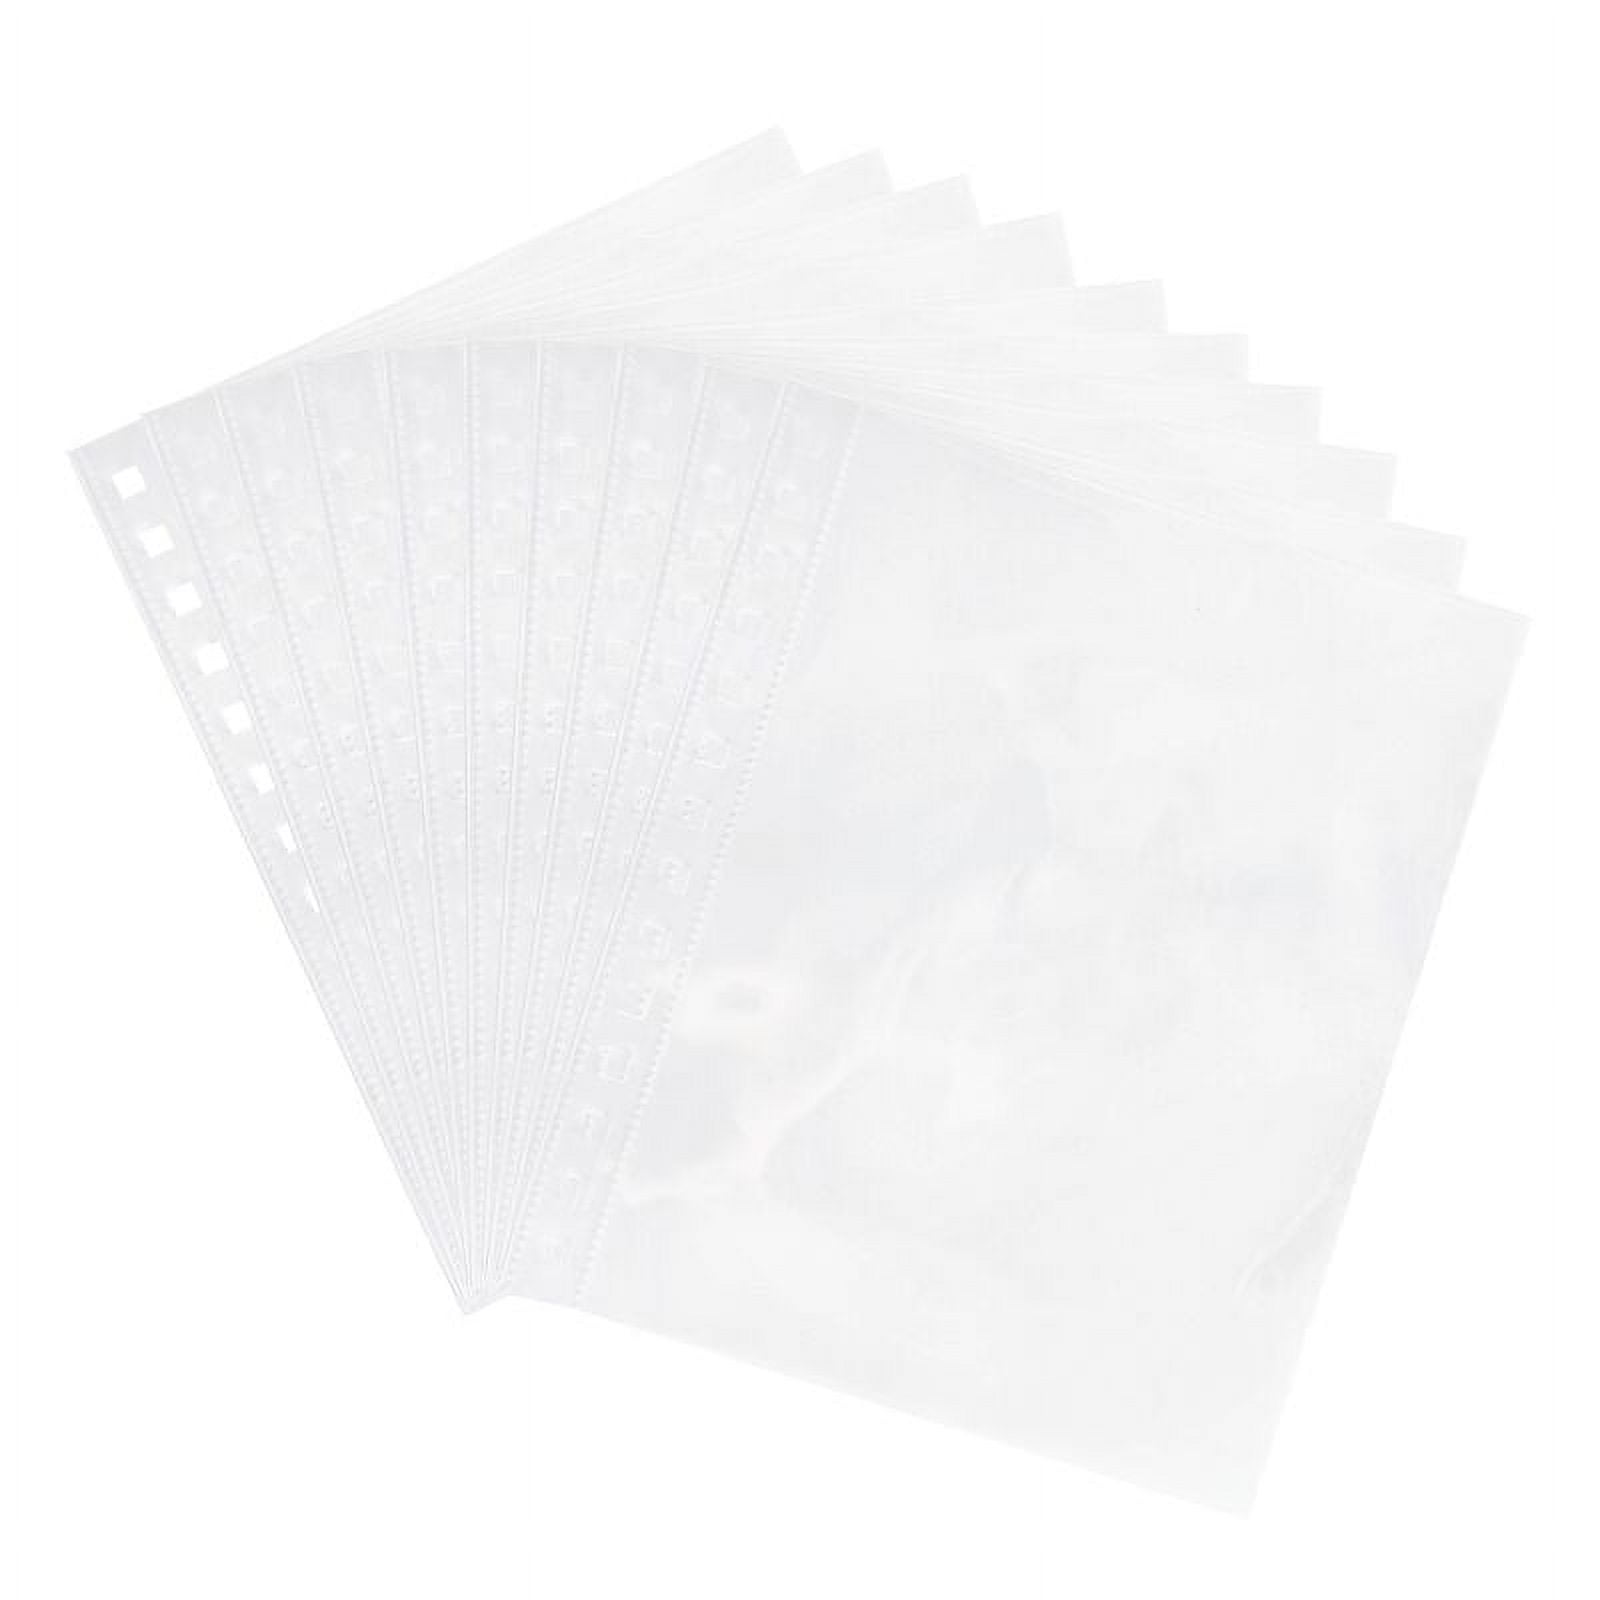  5x7 Clear Plastic Sleeves